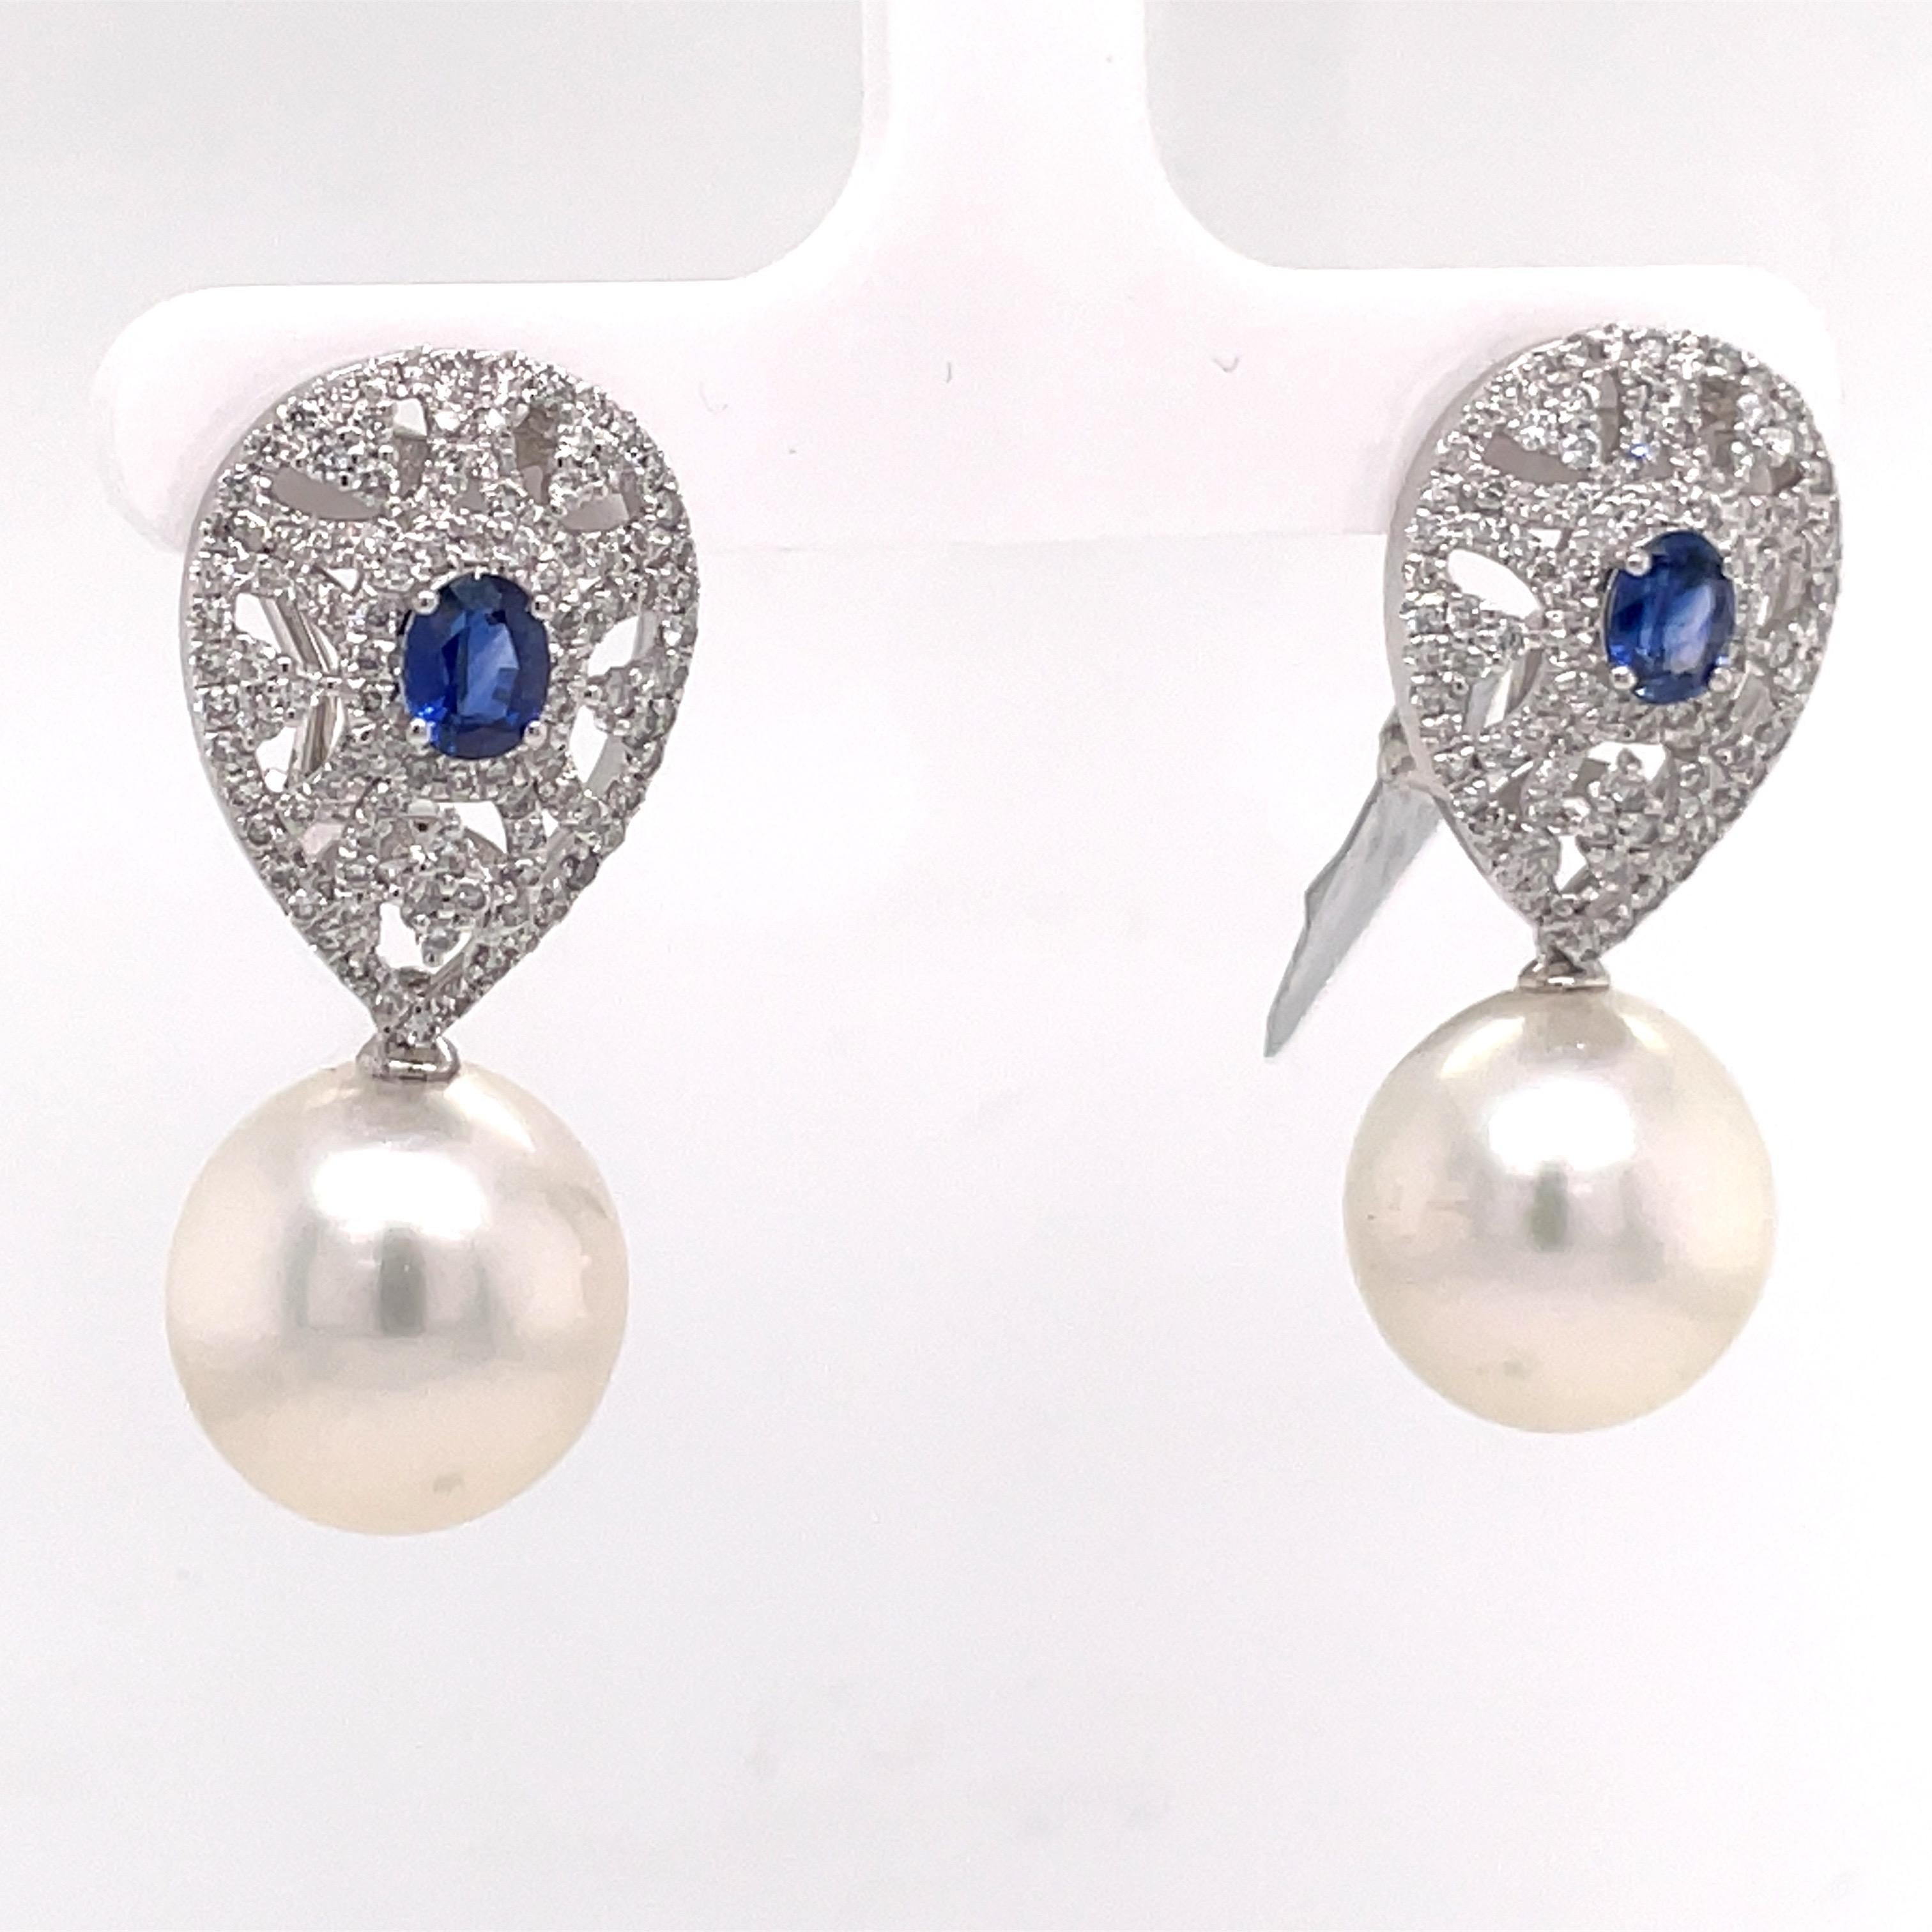 Contemporary Sapphire Diamond South Sea Pearl Drop Earrings 2.16 Carats 18 Carat White Gold For Sale